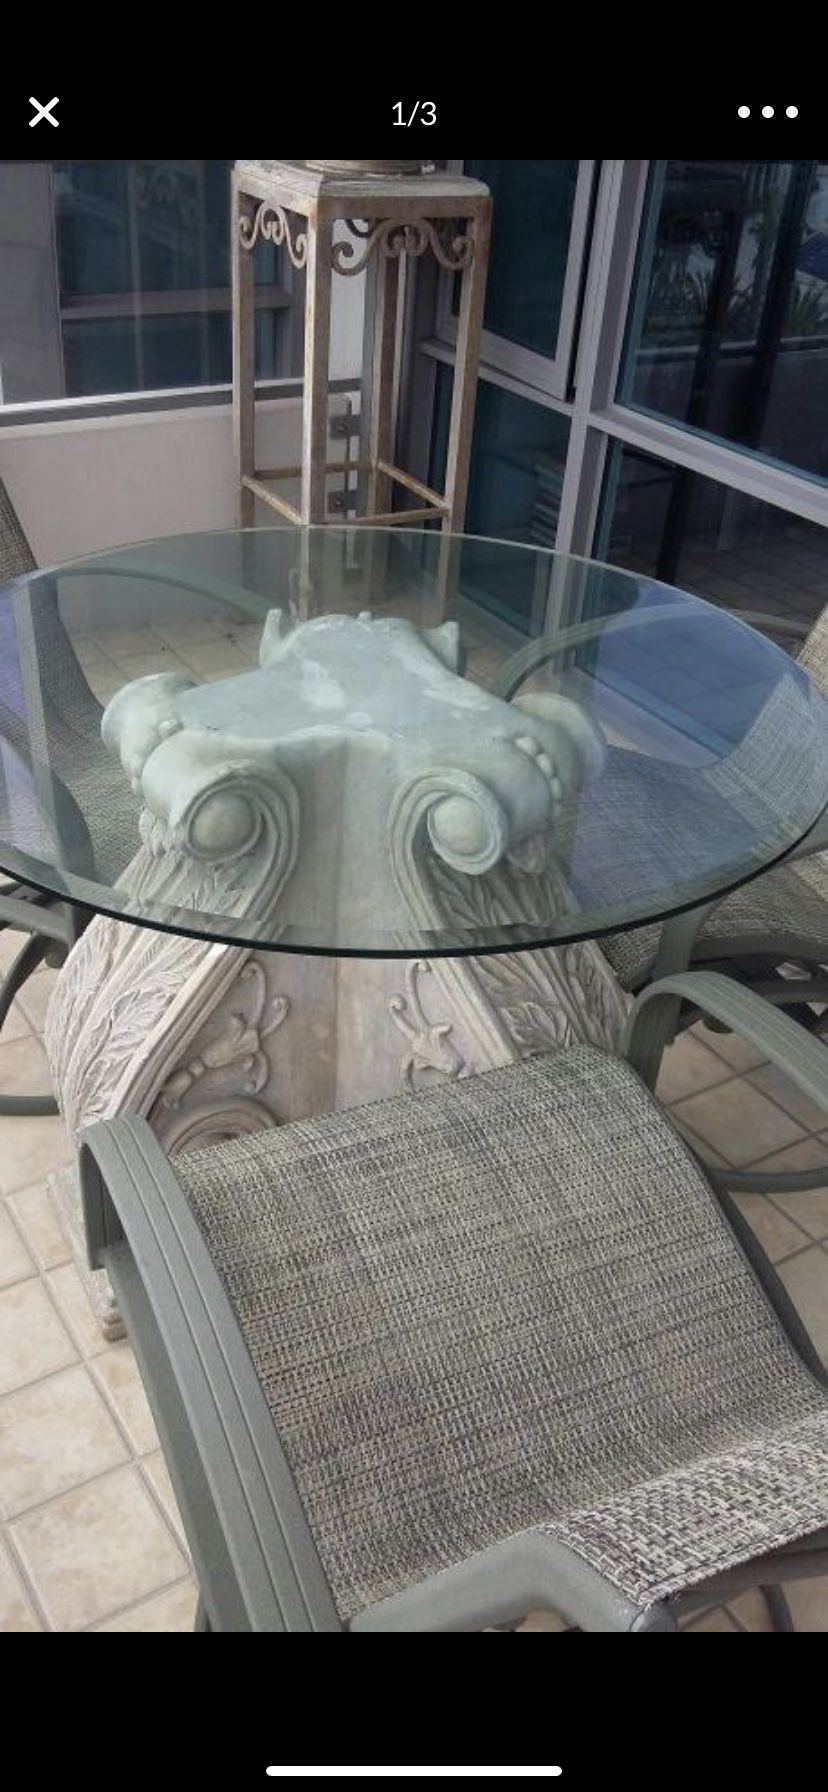 Patio furniture 4 chairs can be rocked